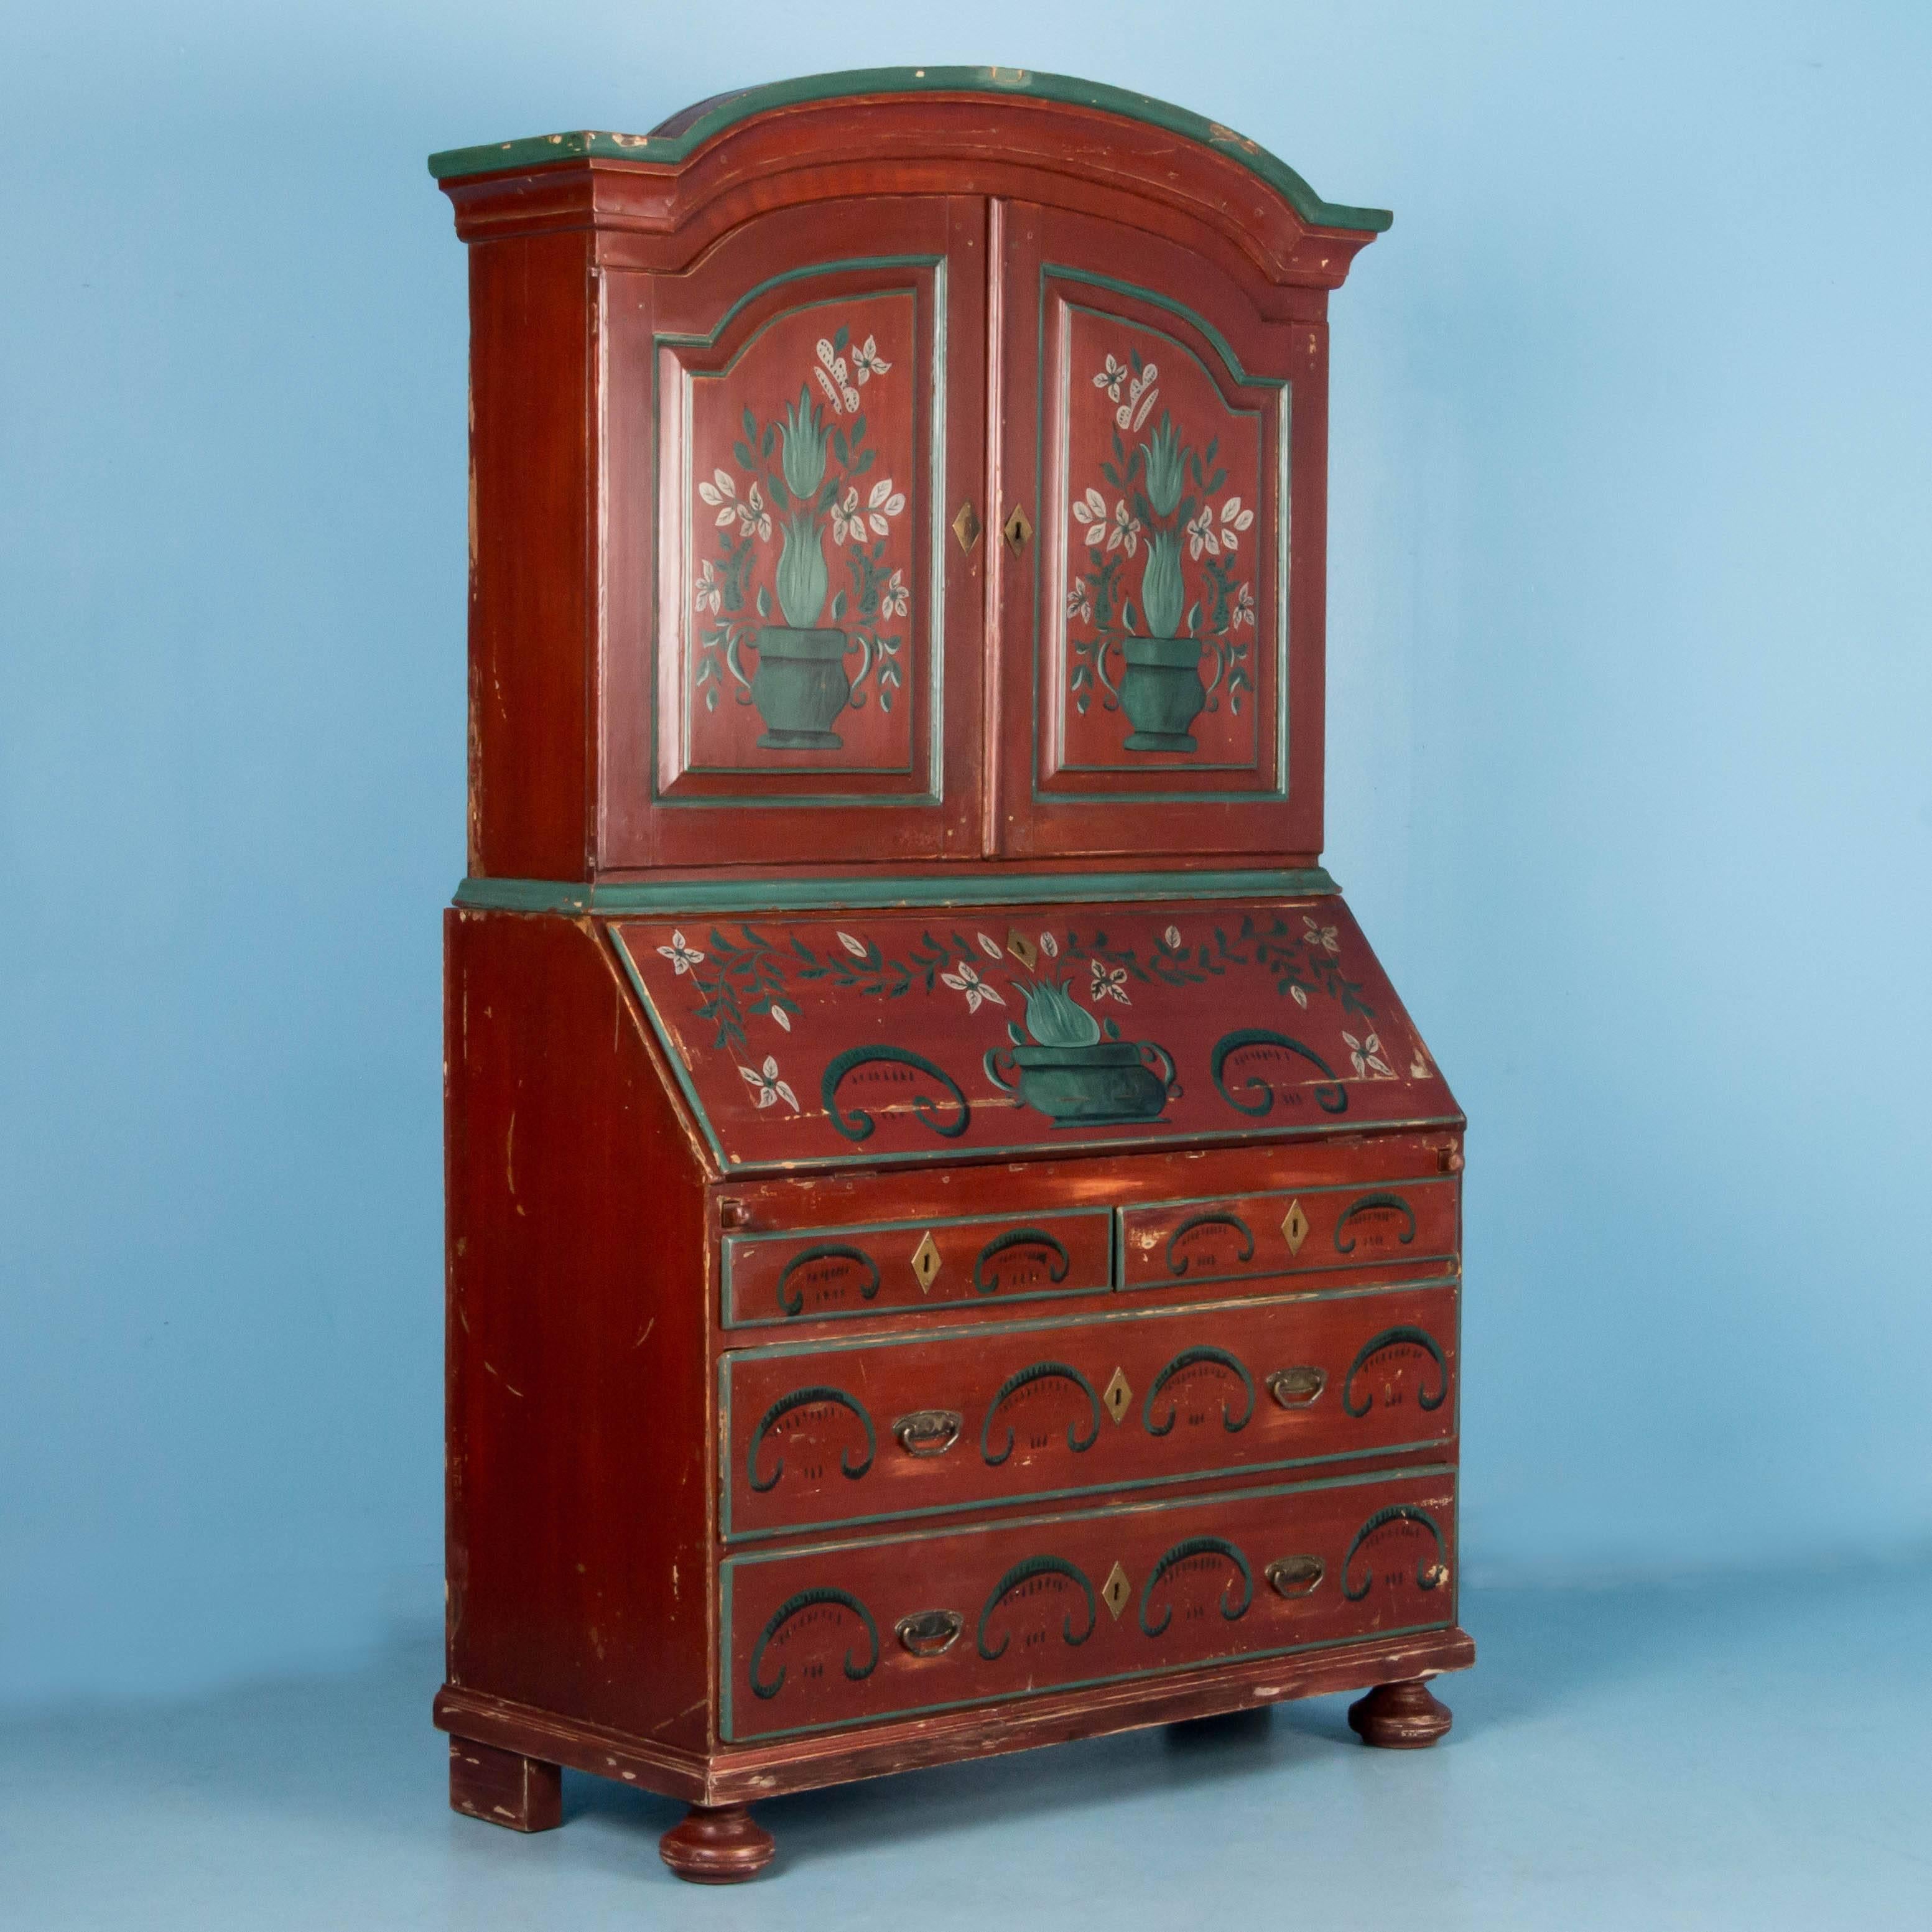 Antique secretary desk from Sweden dated 1897, with original paint and floral decorations made in two sections. Below the arched pediment are two raised panel doors with three fixed shelves inside. In the lower cabinet are two full and two half